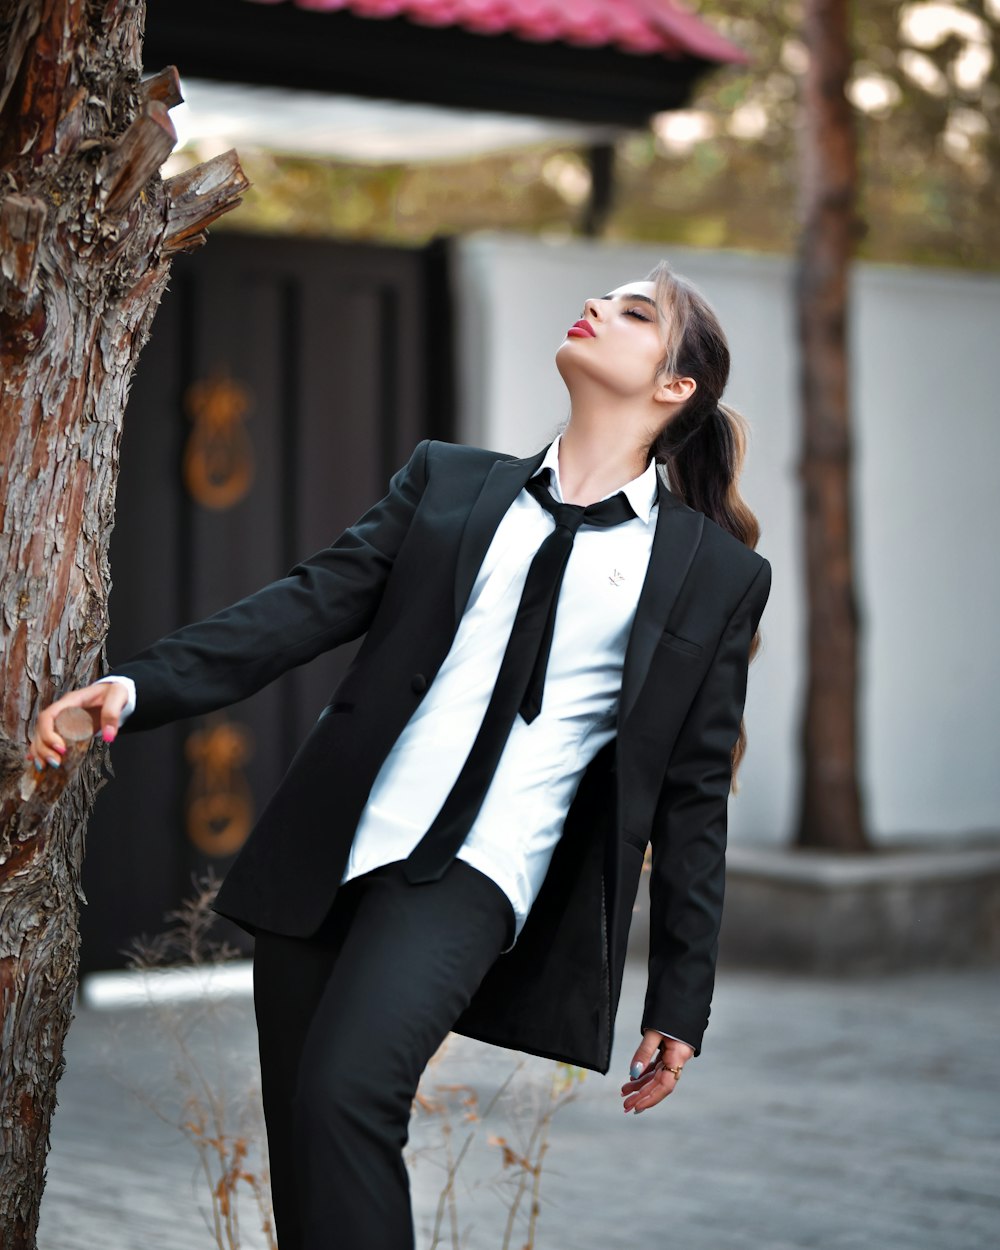 a woman in a suit leaning against a tree